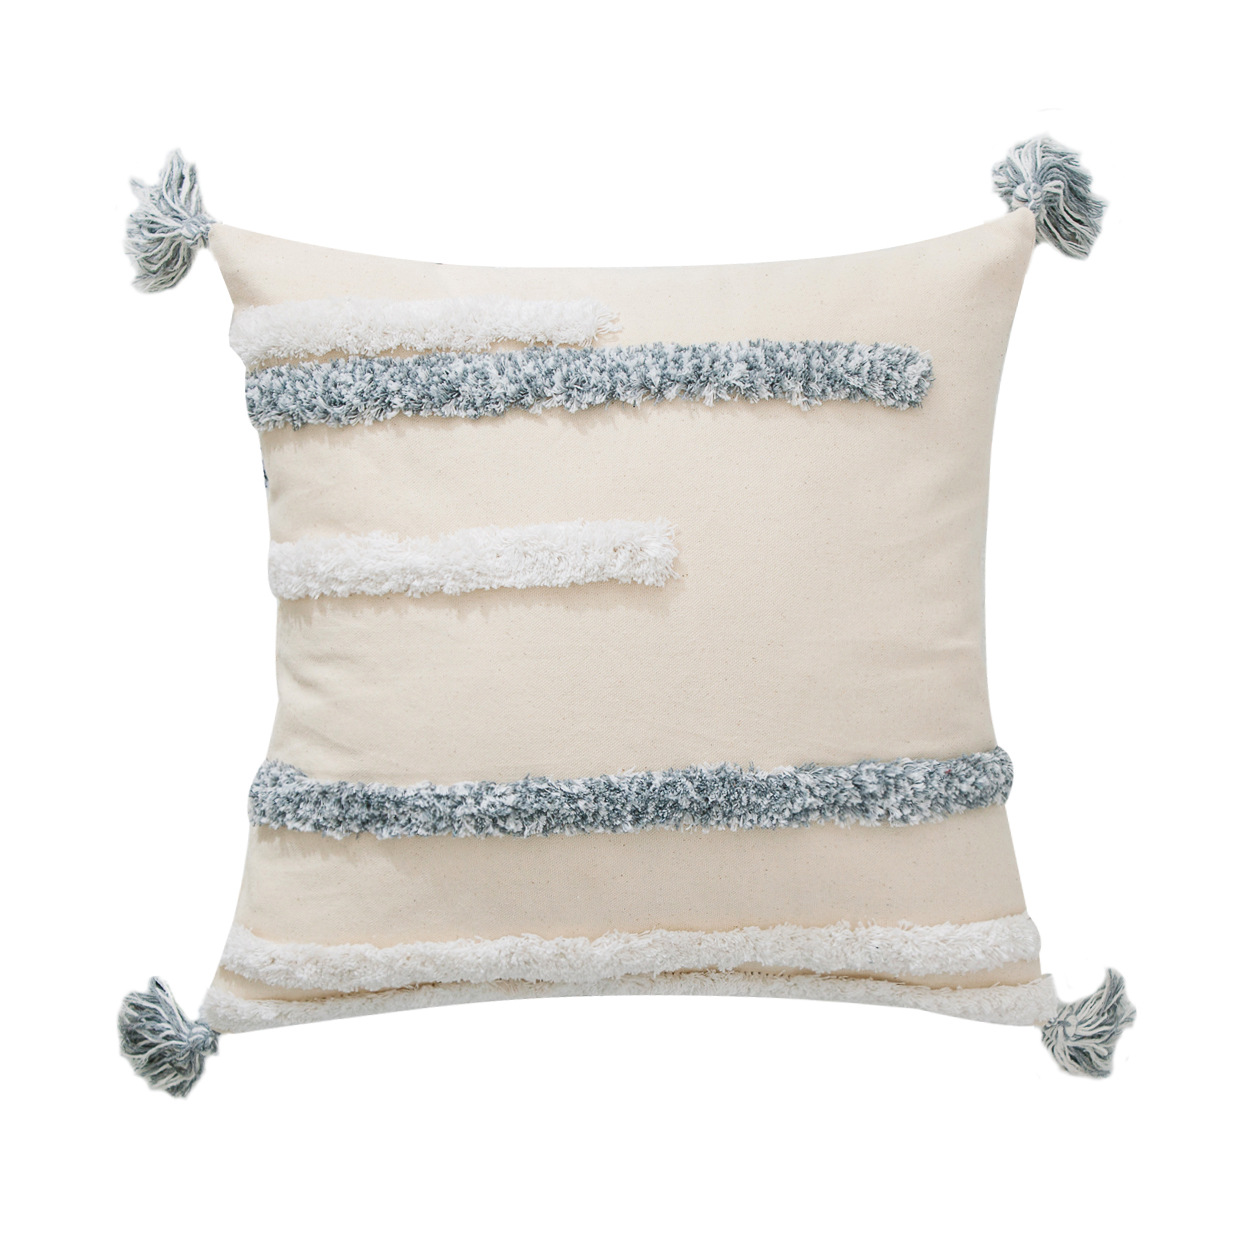 Five tufted throw pillowcases